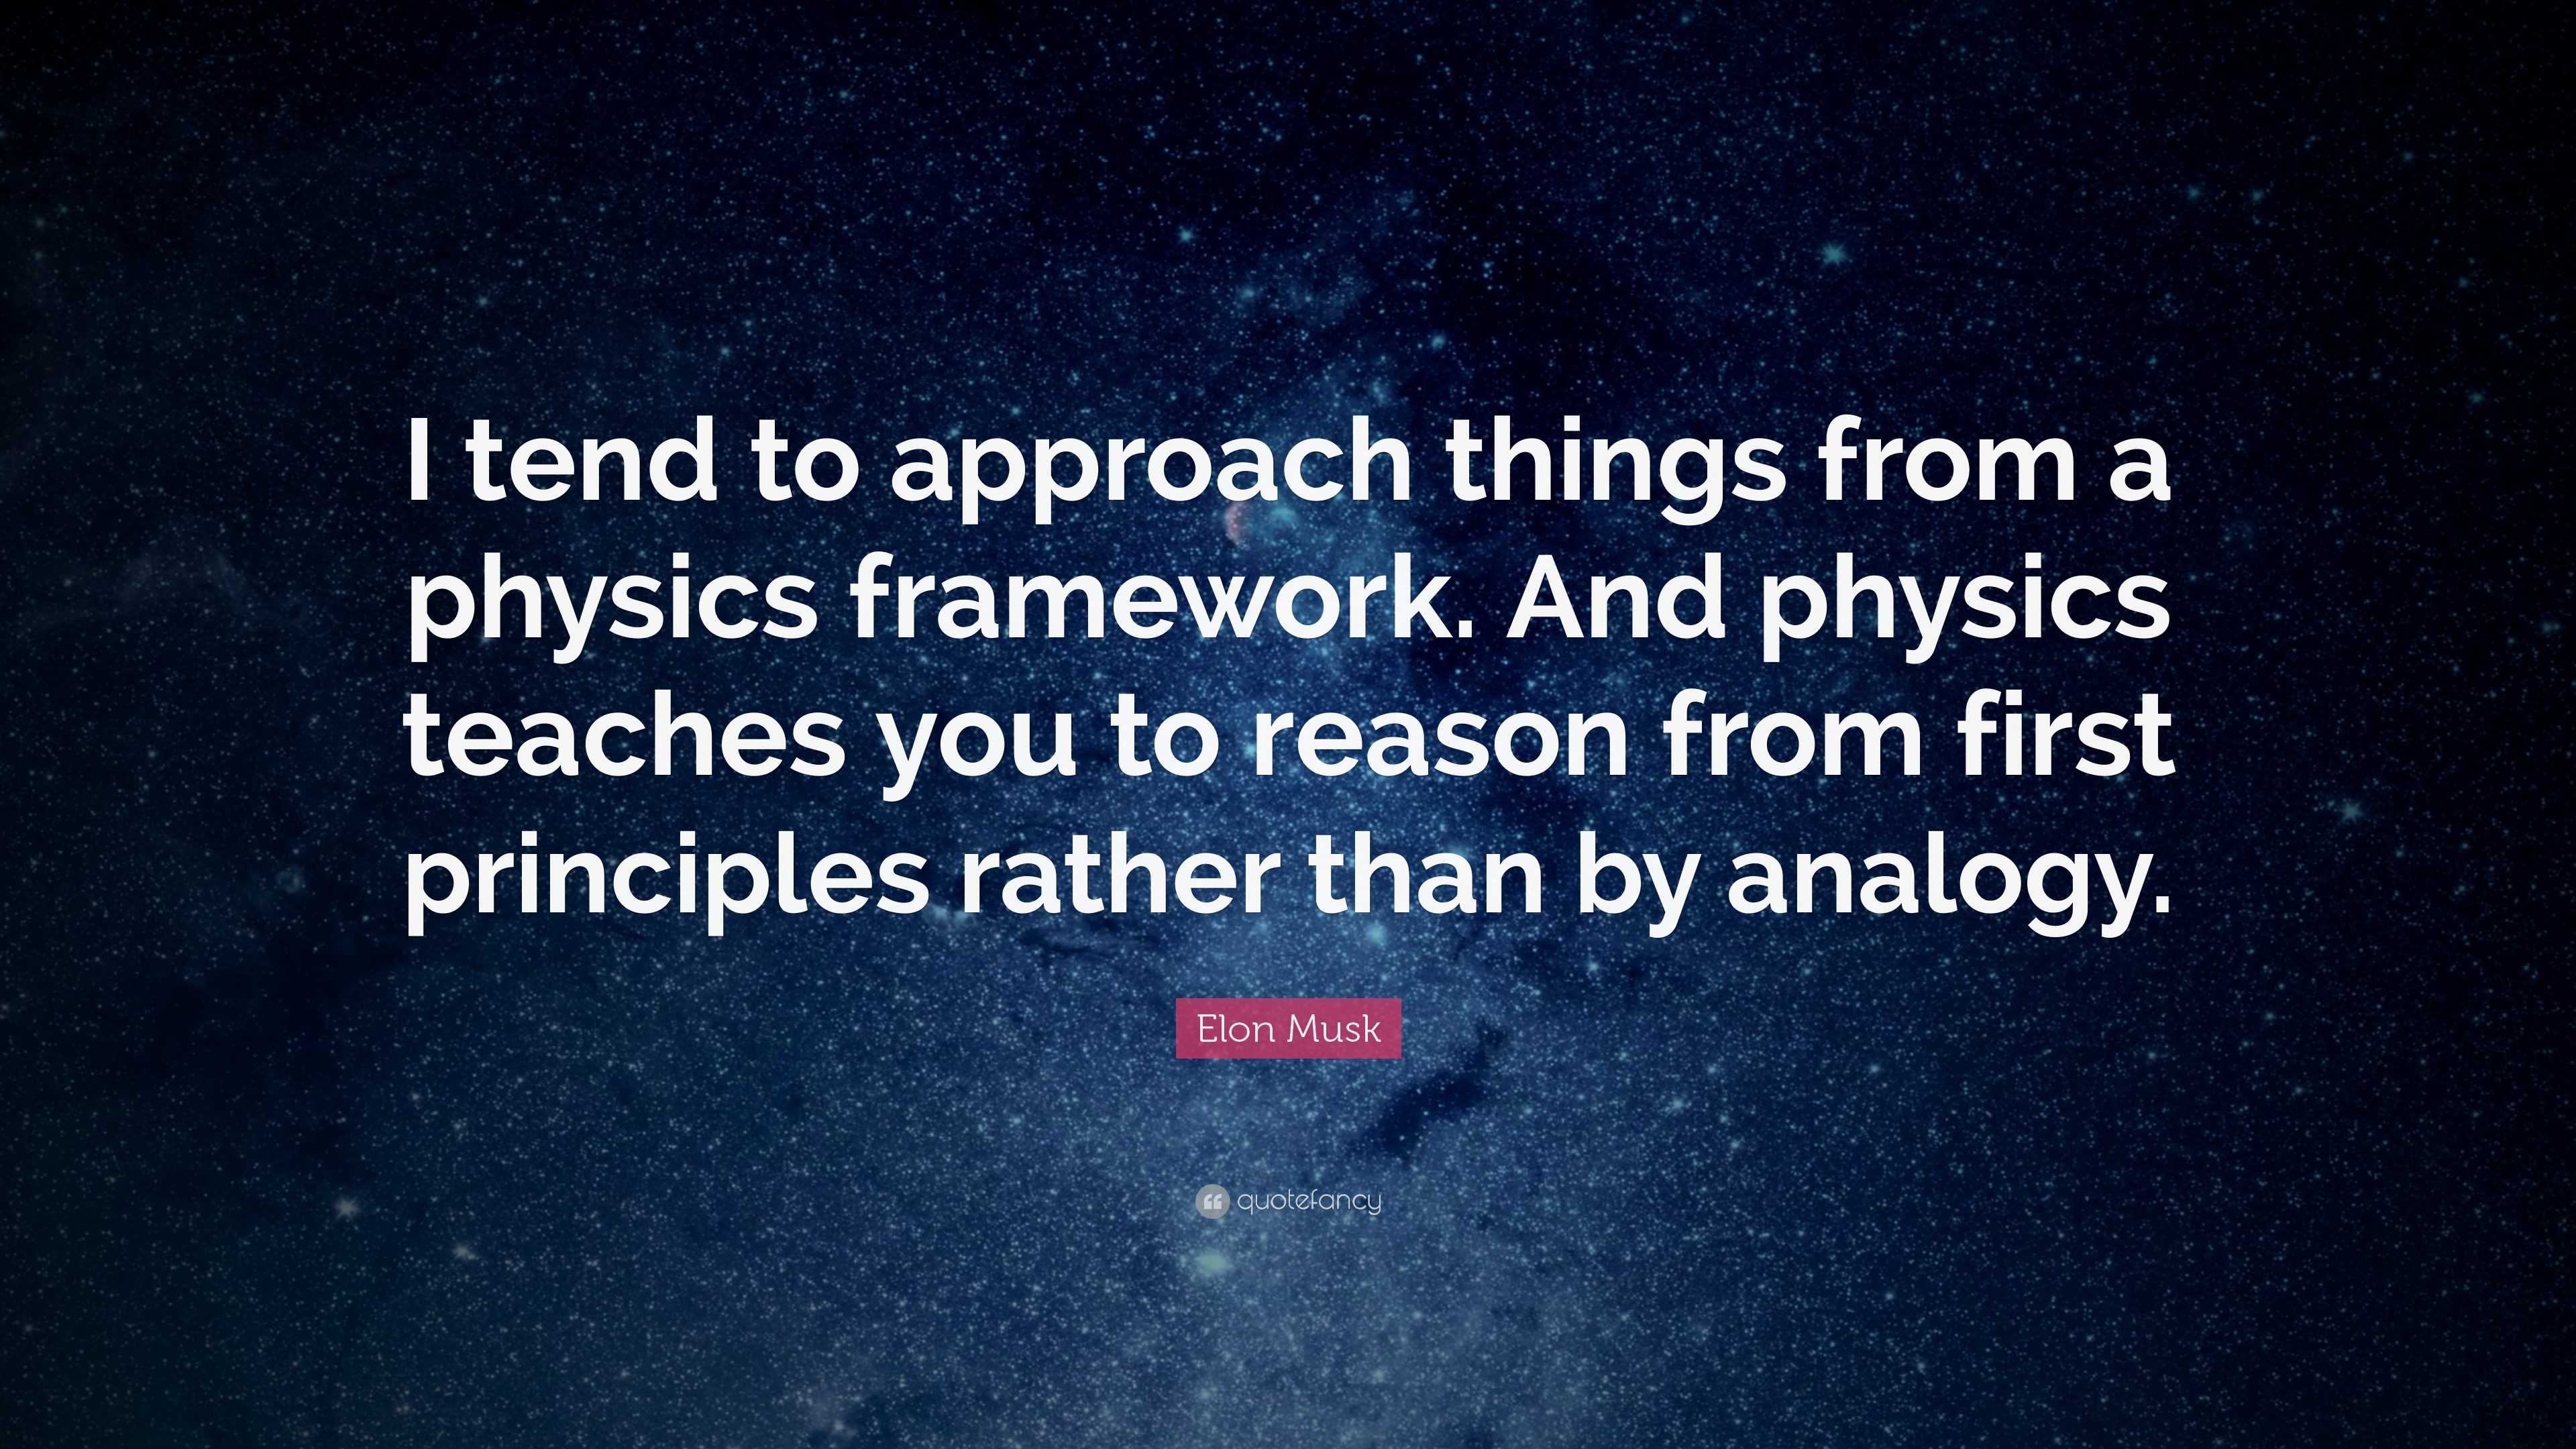 3840x2160 Elon Musk Quote: “I tend to approach things from a physics framework. And